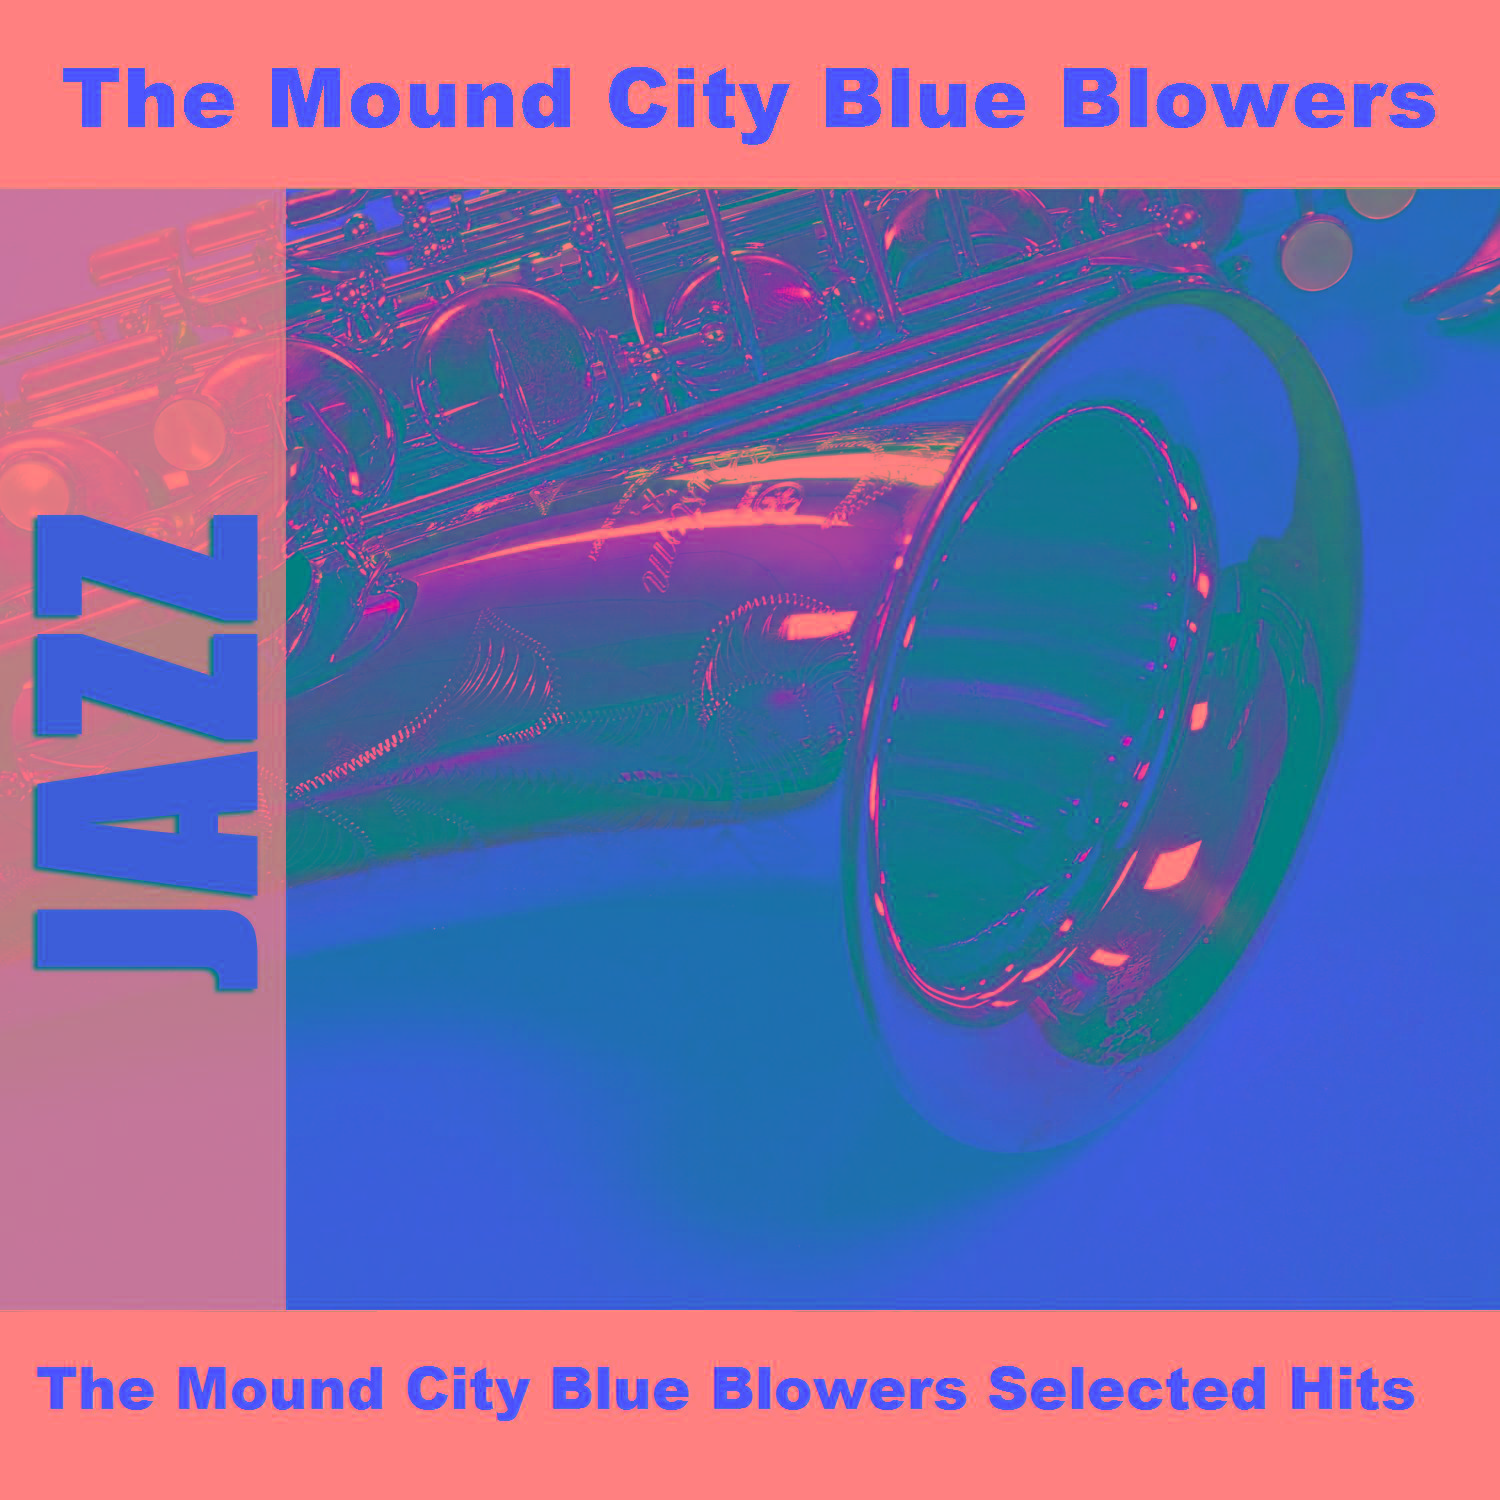 The Mound City Blue Blowers Selected Hits